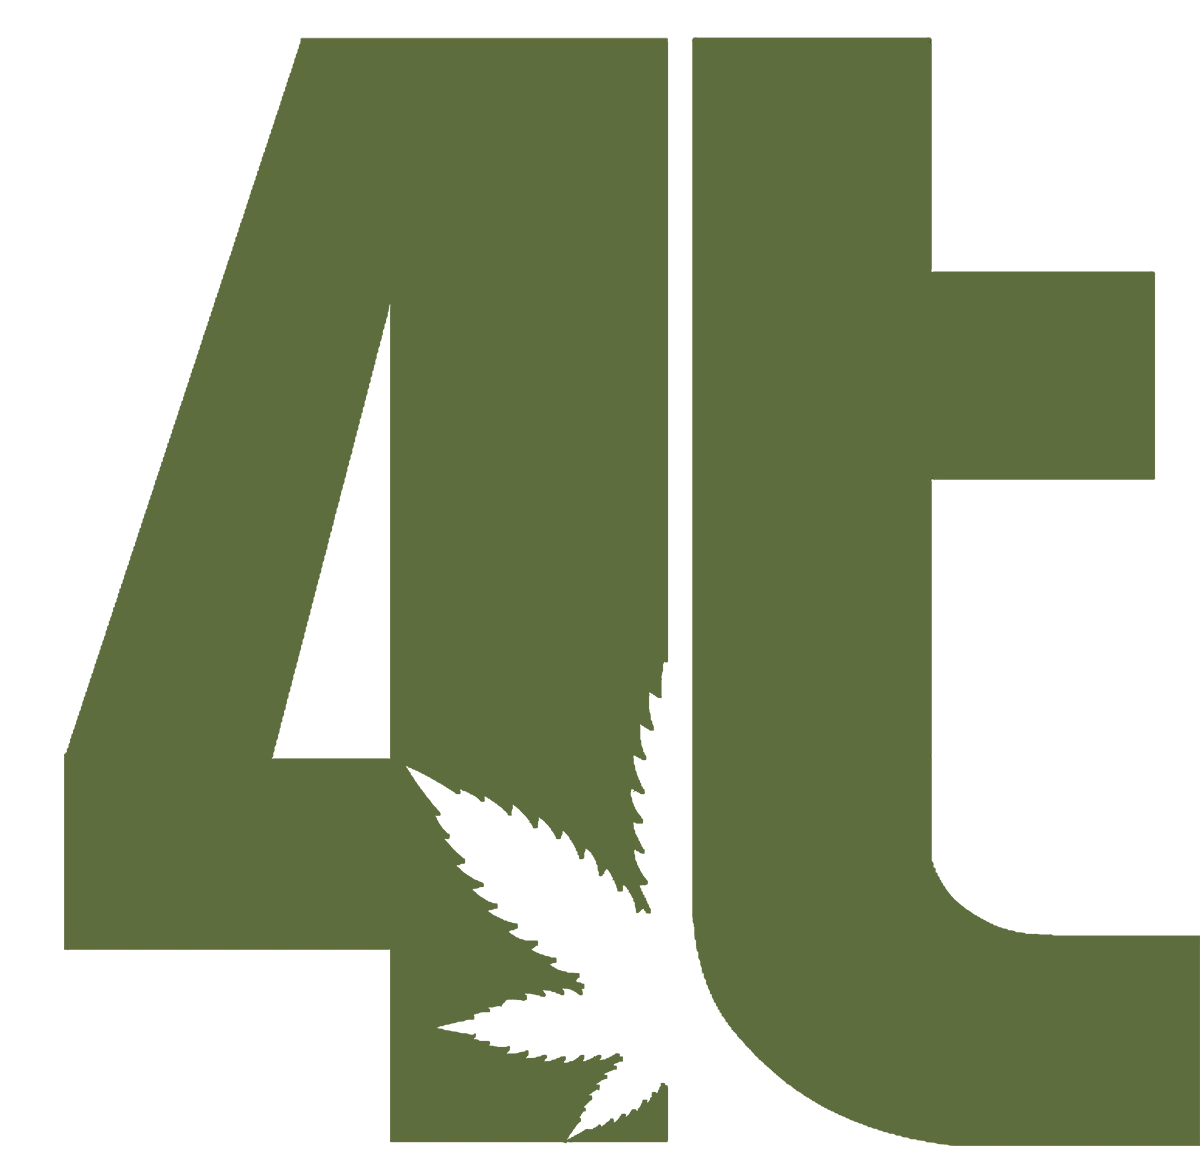 Simple 4trees Cannabis Building logo with the 4 and the T only in a forest green